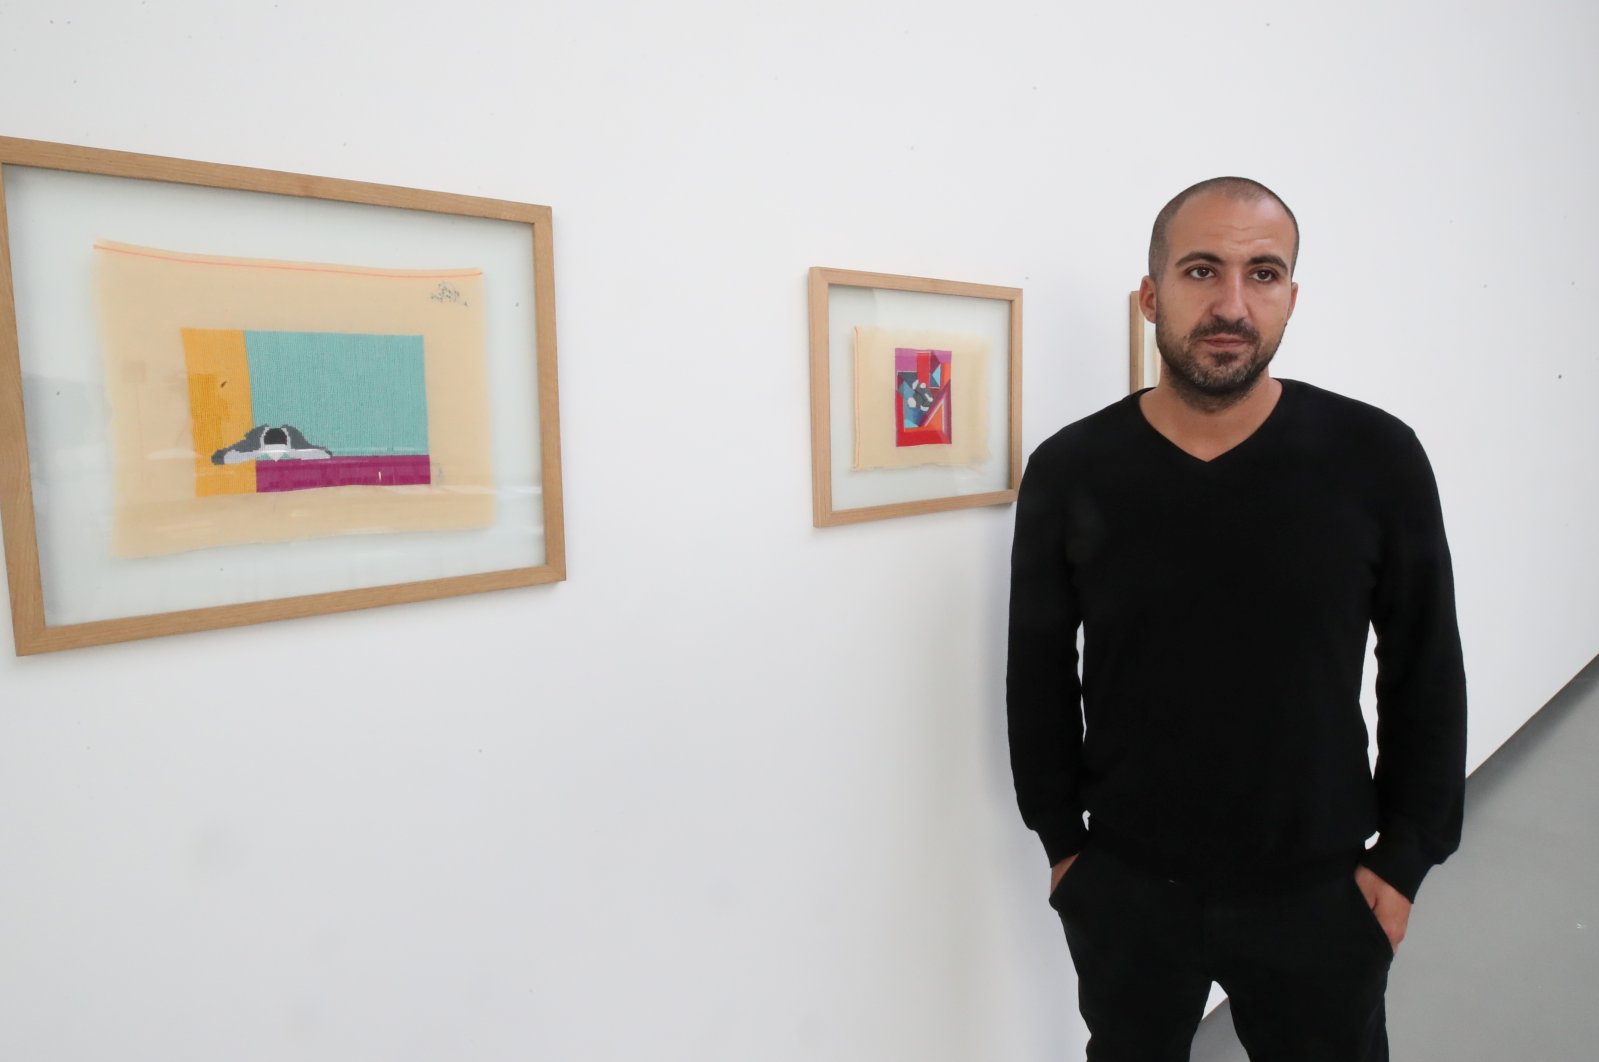 Palestinian artist Majd Abdel Hamid poses for Reuters during his exhibition "A Stitch in Times" in Brussels, Belgium Oct. 5, 2021. (Reuters Photo)